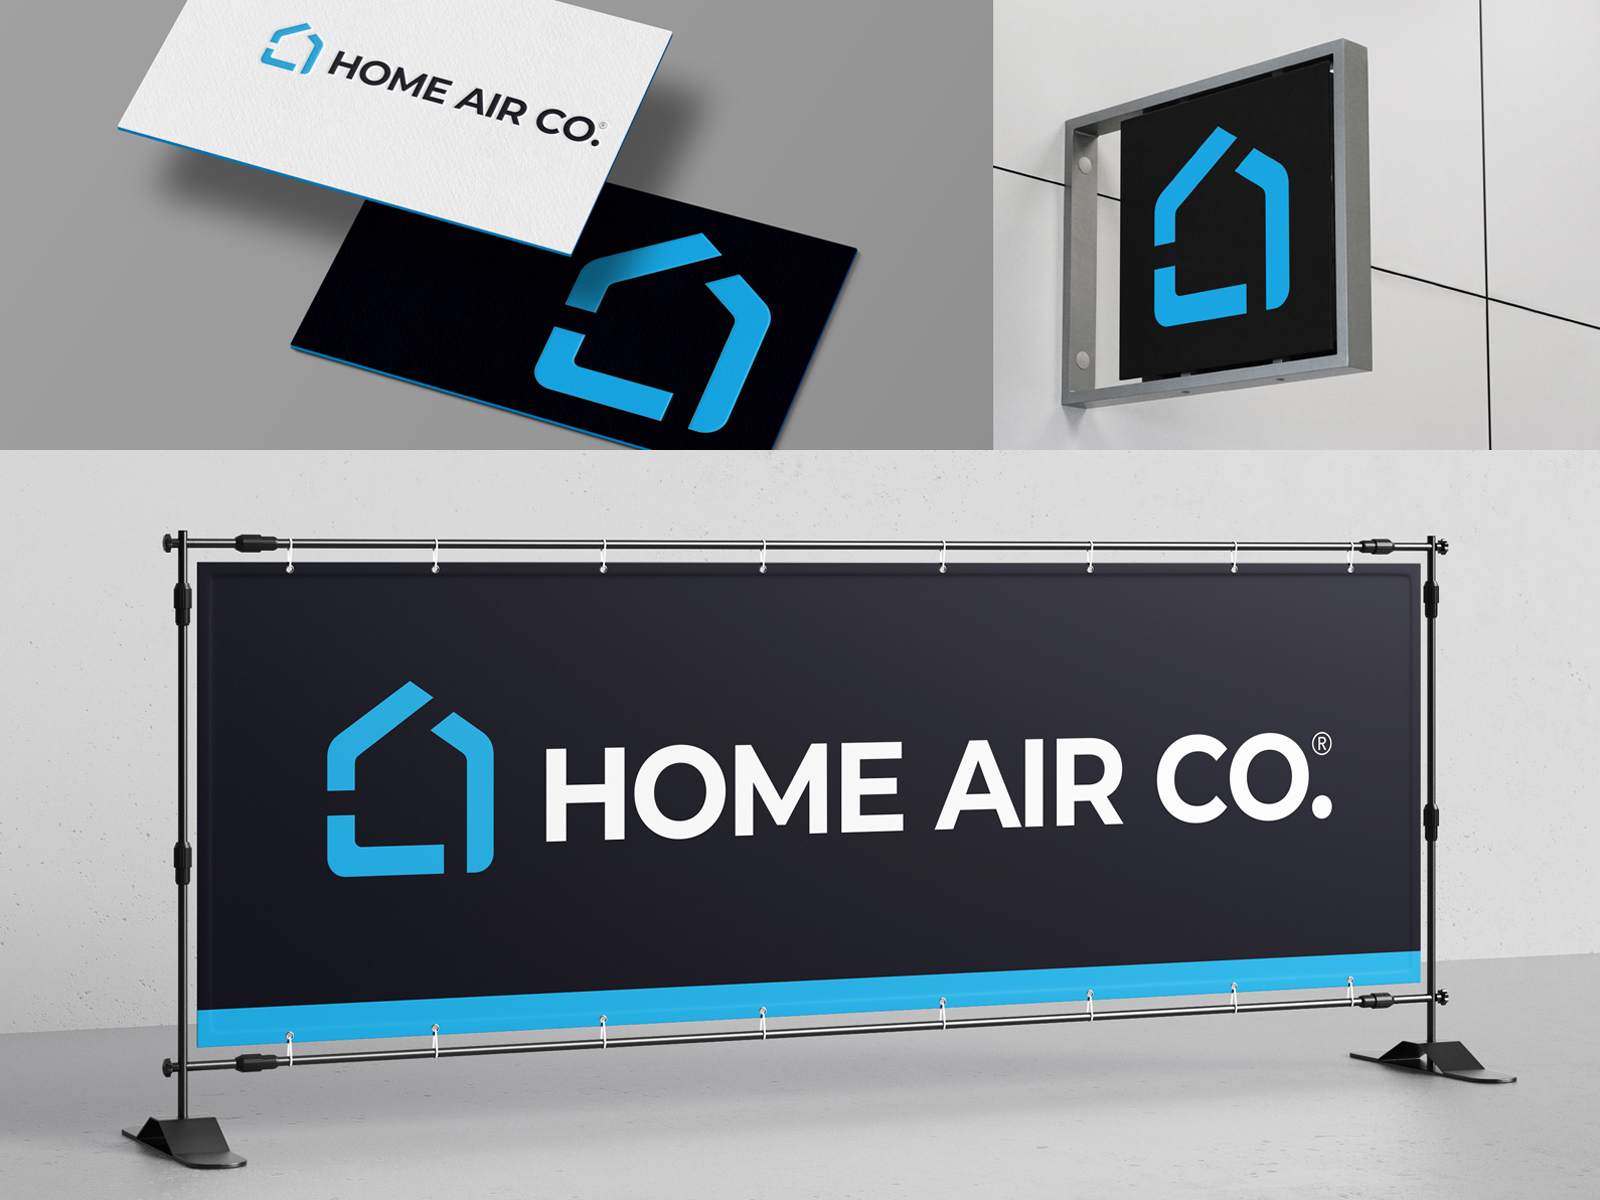 HAC fresh monoline icon house american collar blue industry condition cooling heating hvac air home